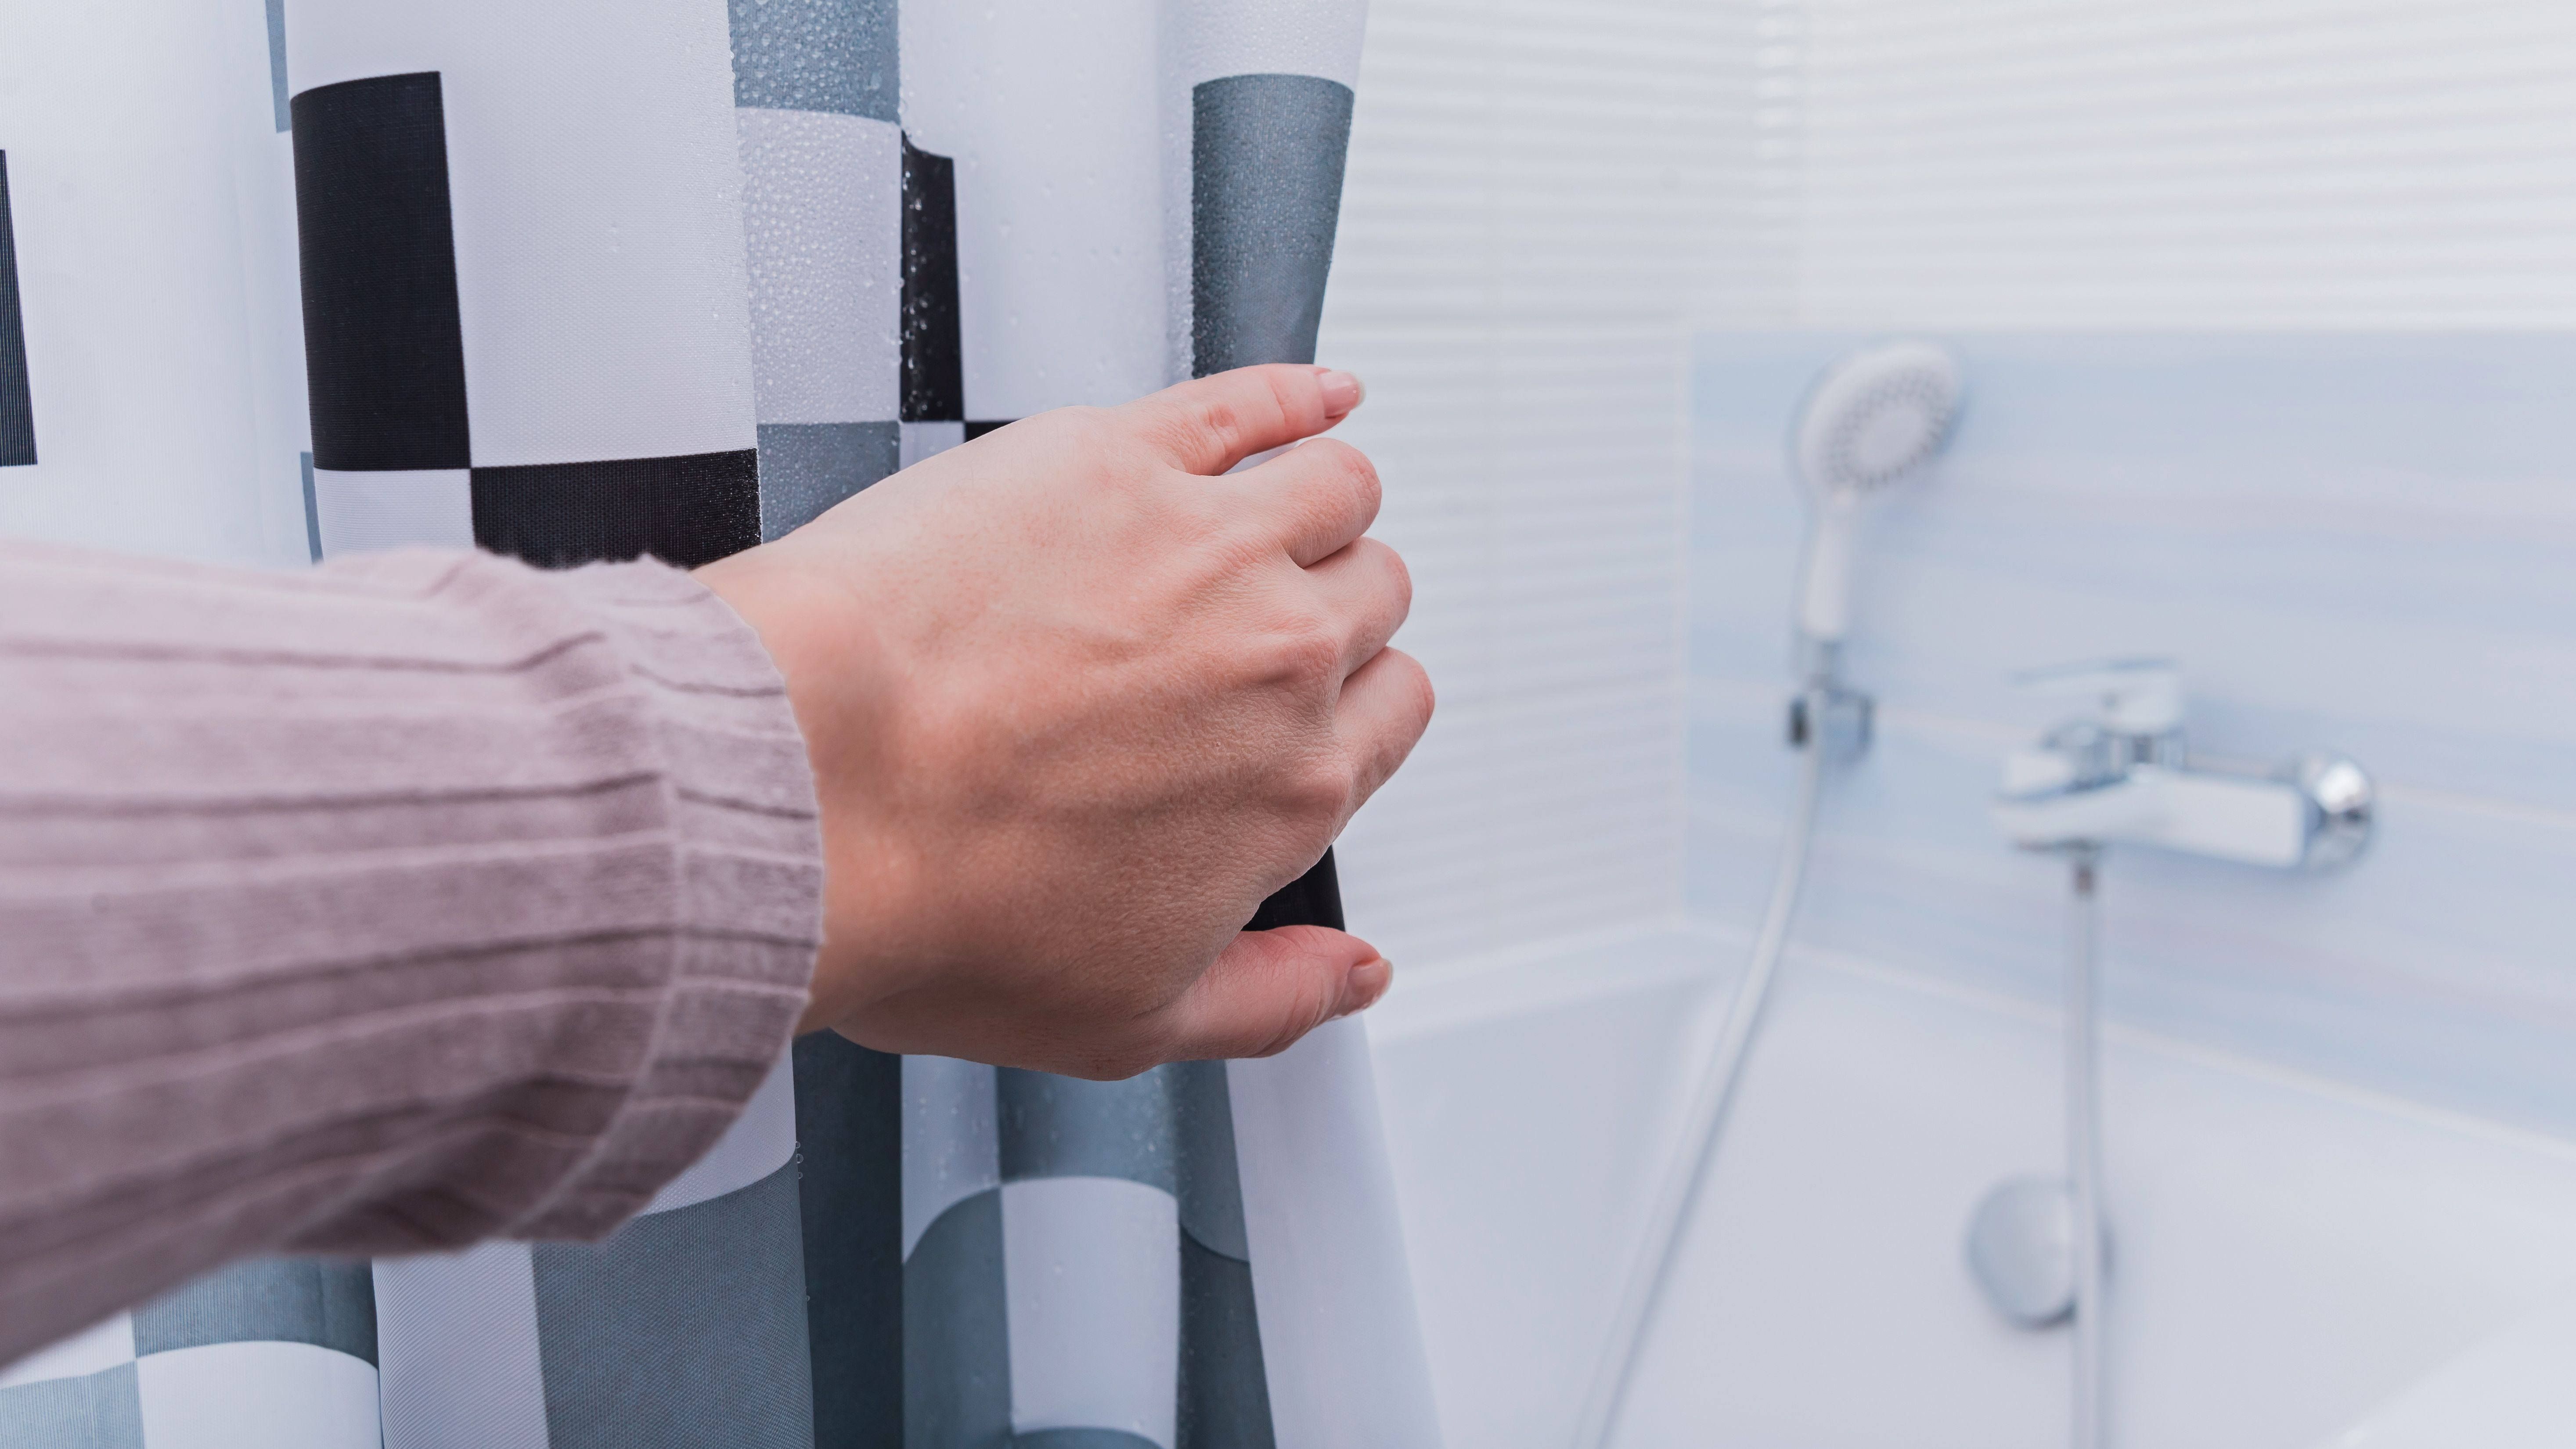 Shower curtain buying guide